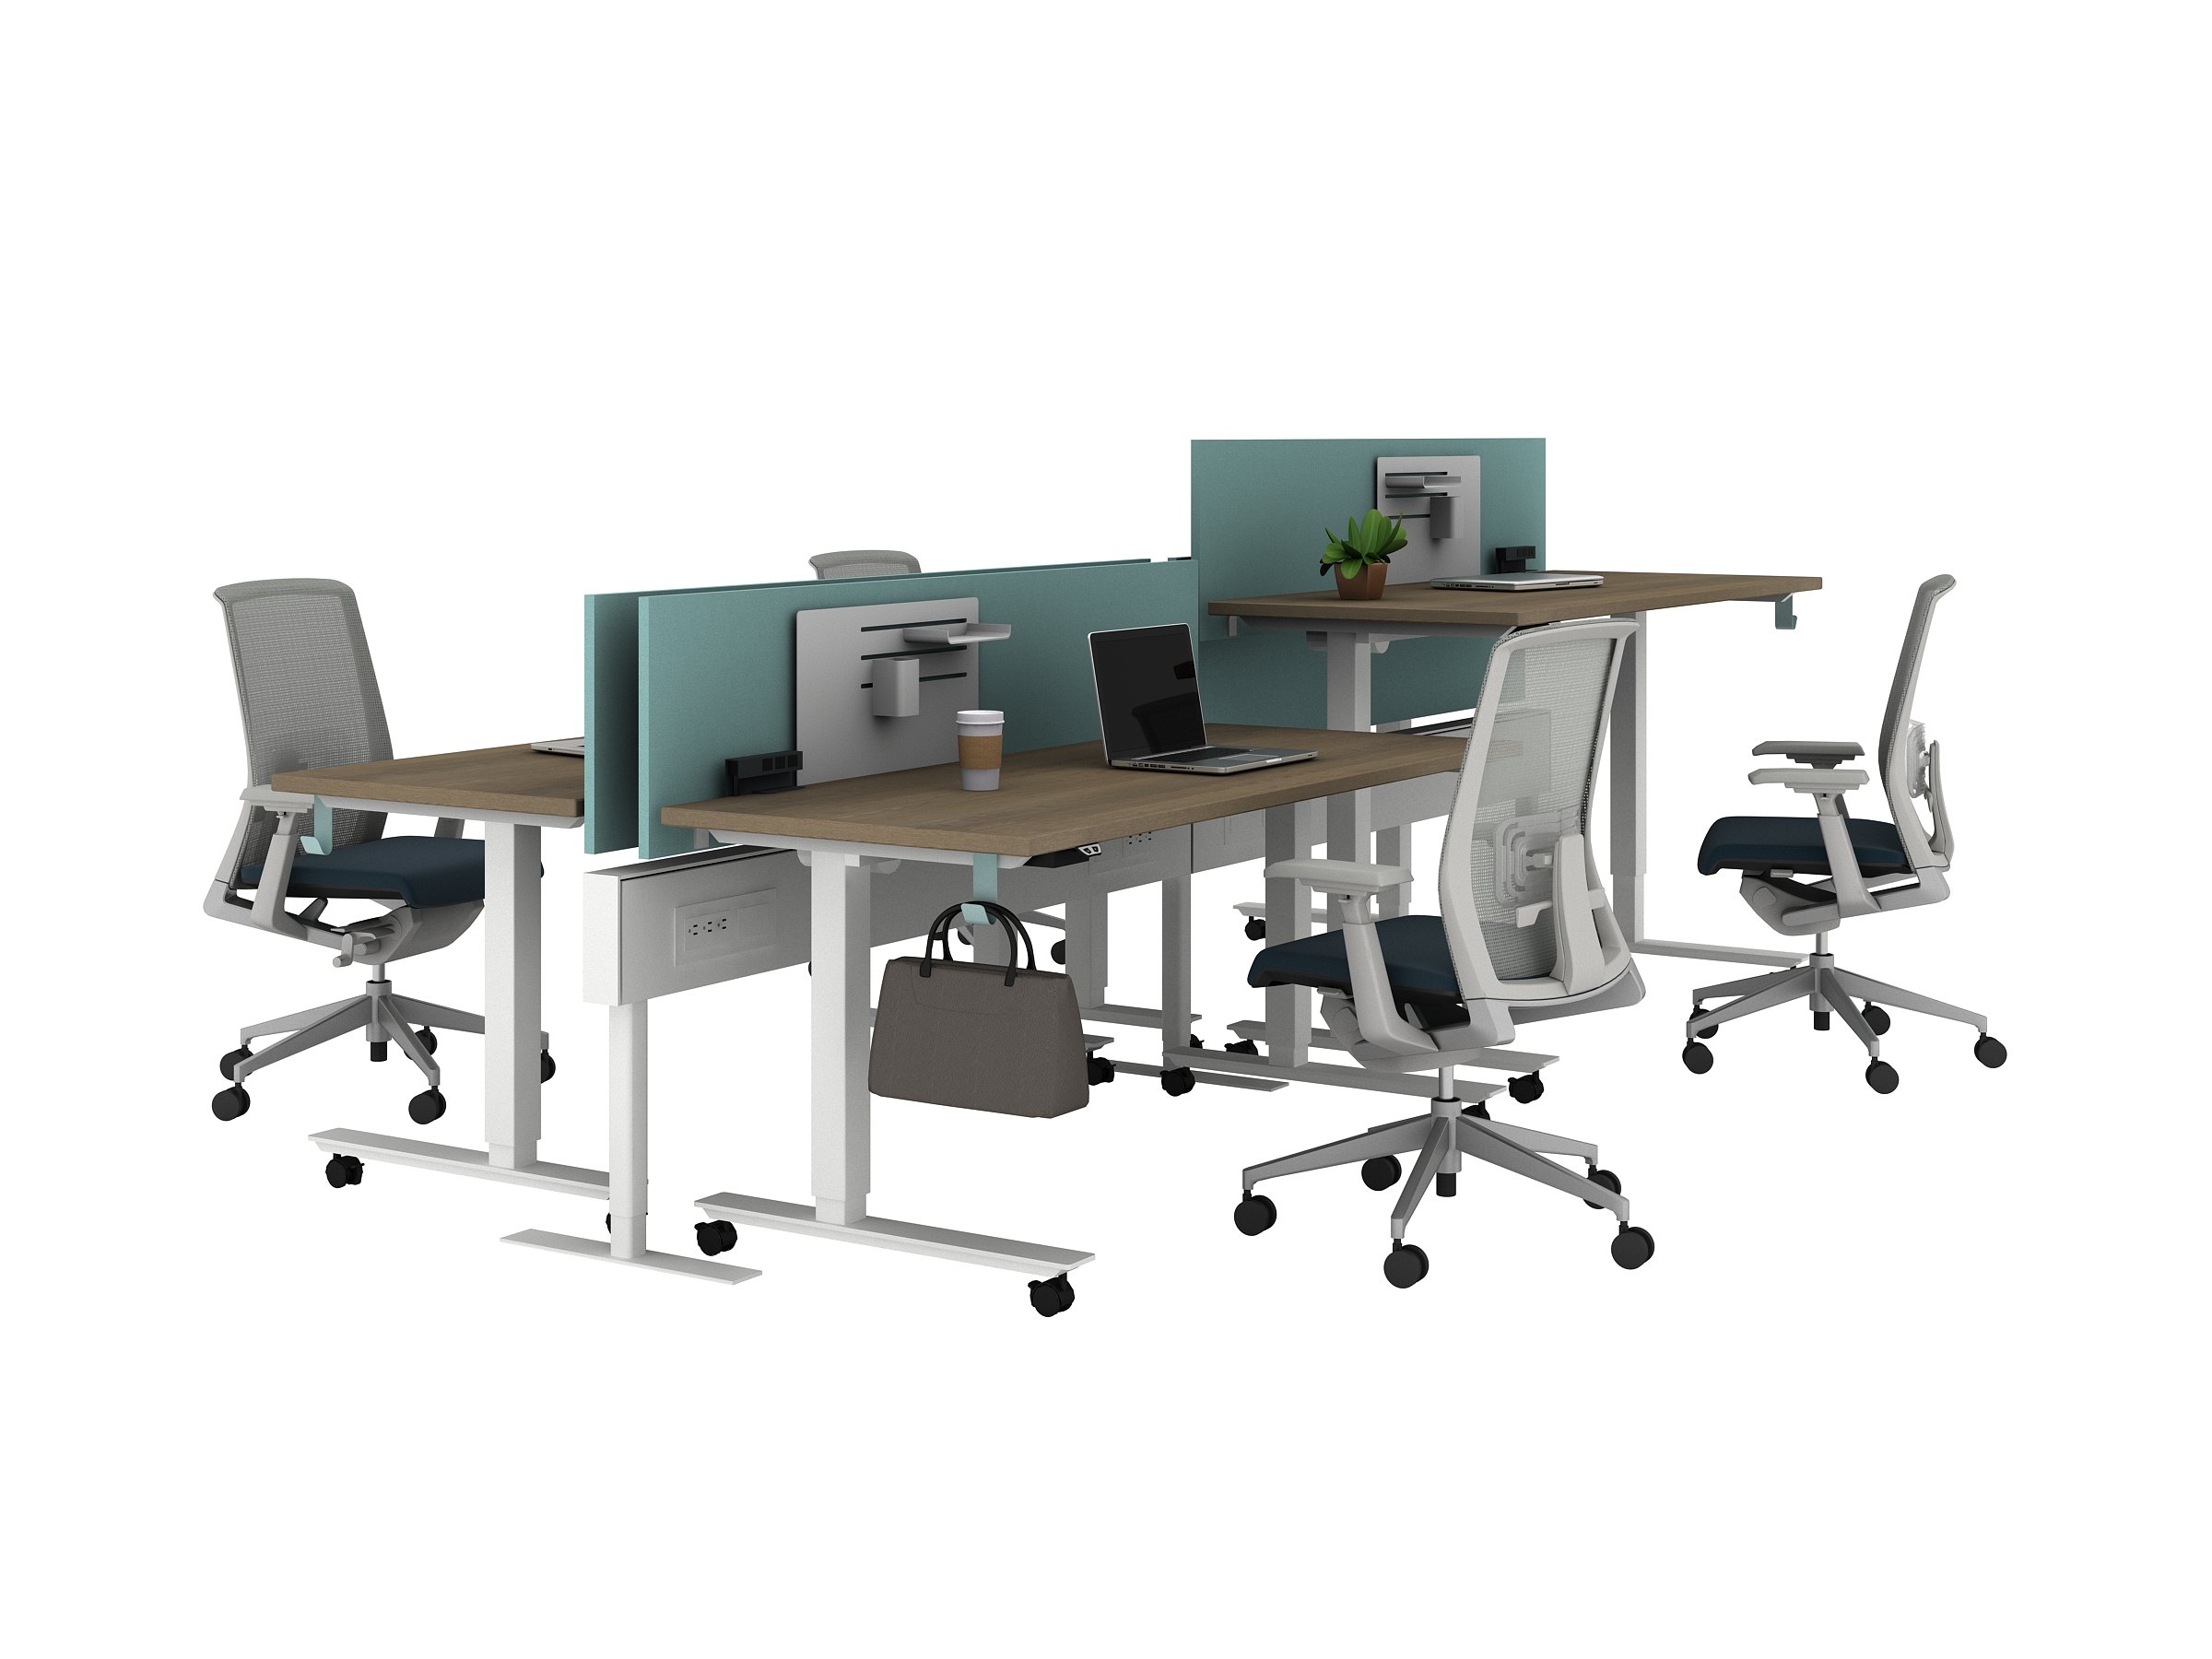 Haworth Belong Plus Screen in blue color dividing height adjustable tables